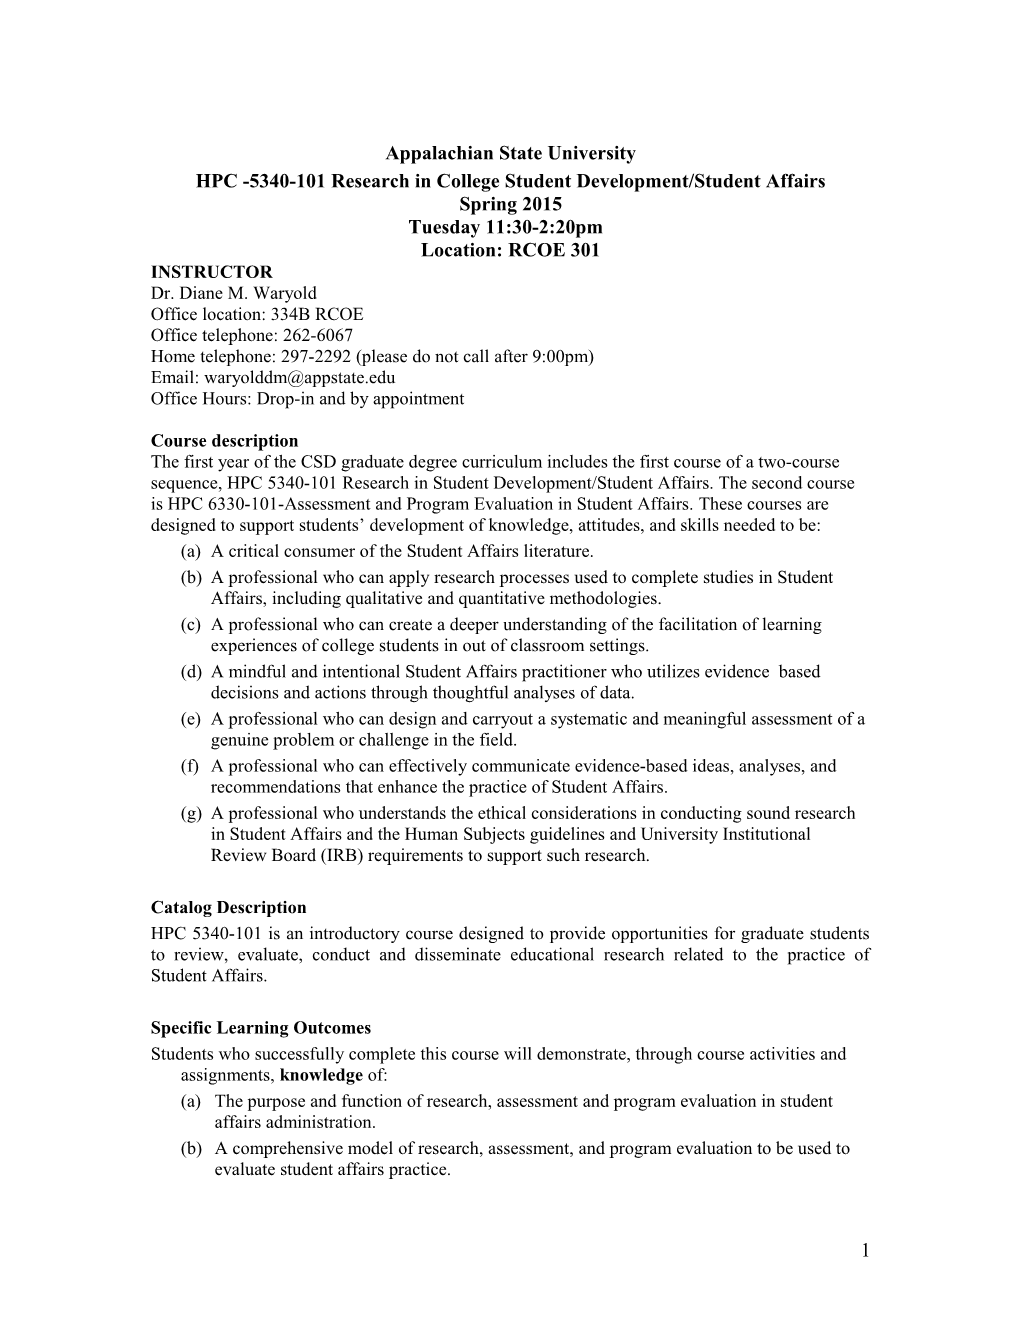 HPC -5340-101 Research in Student Development/Student Affairs